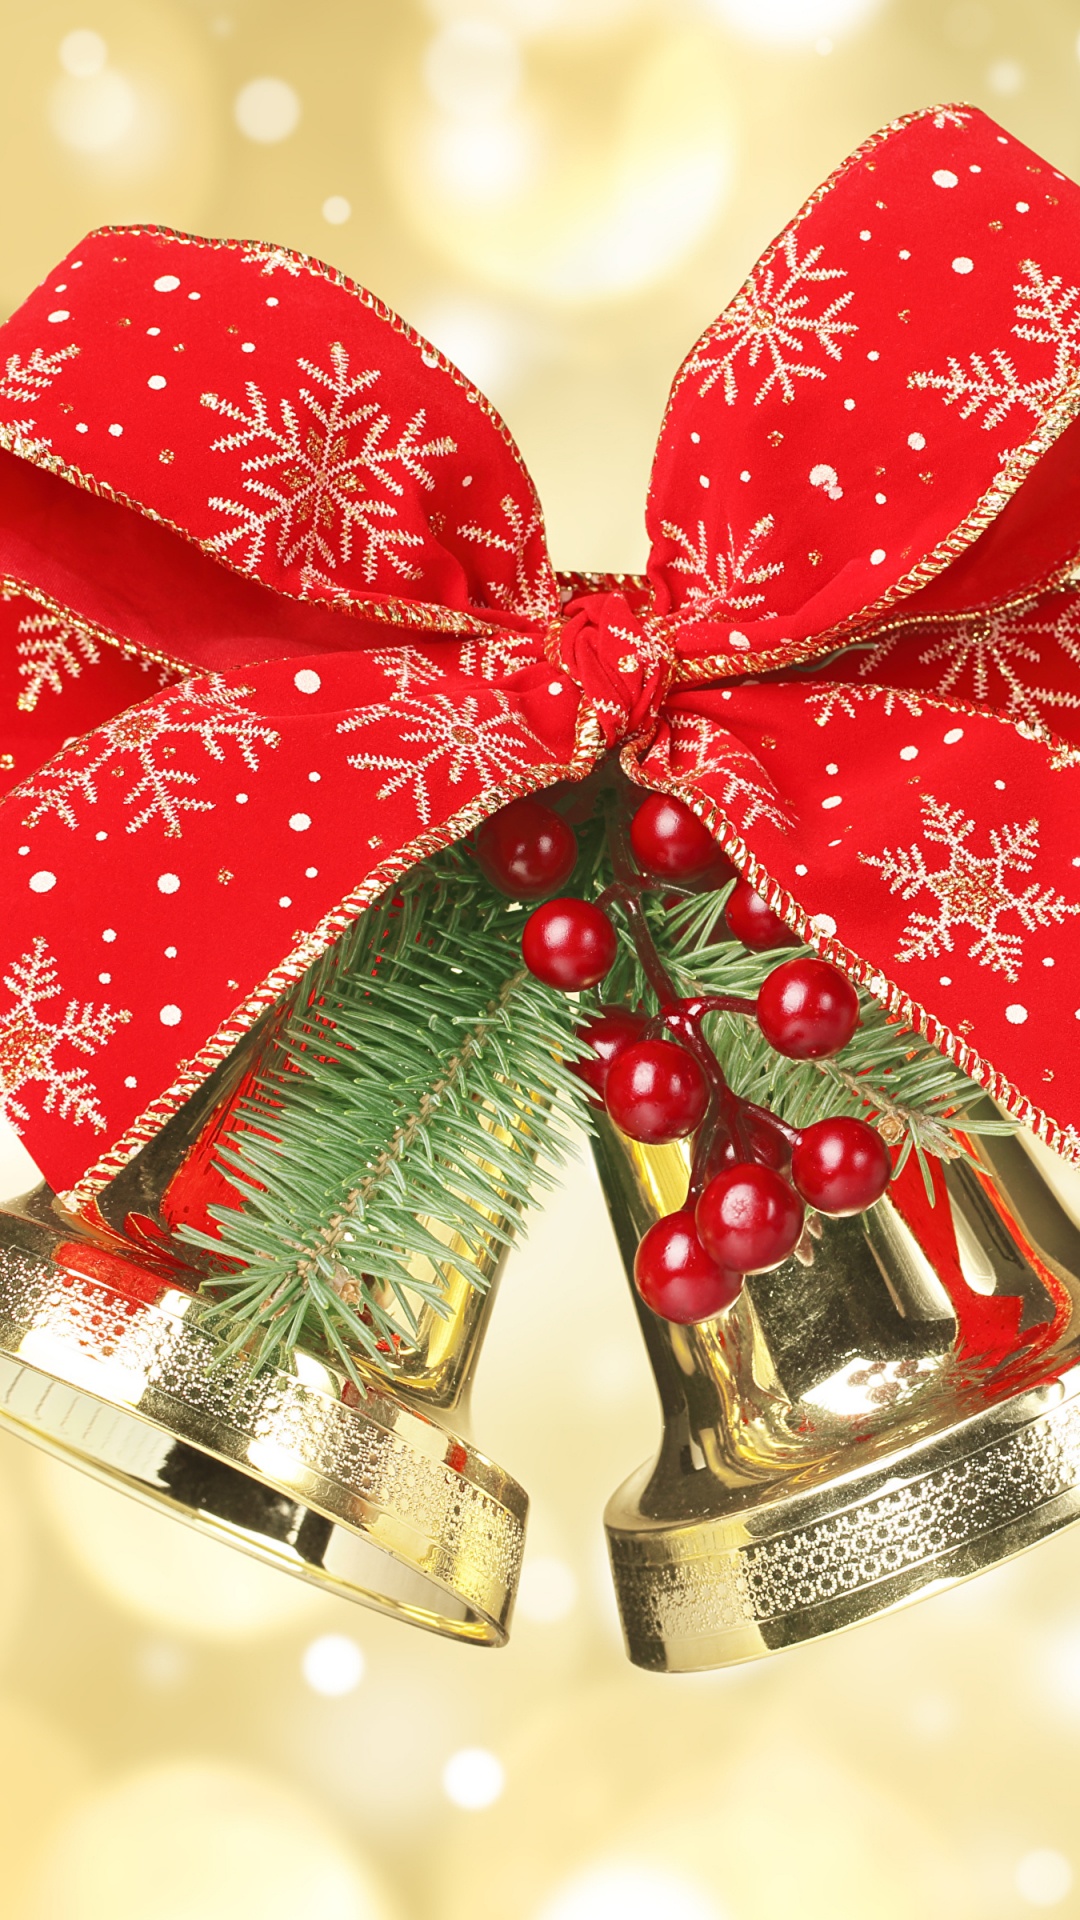 Christmas Day, New Year, Holiday, Christmas Ornament, Christmas Decoration. Wallpaper in 1080x1920 Resolution